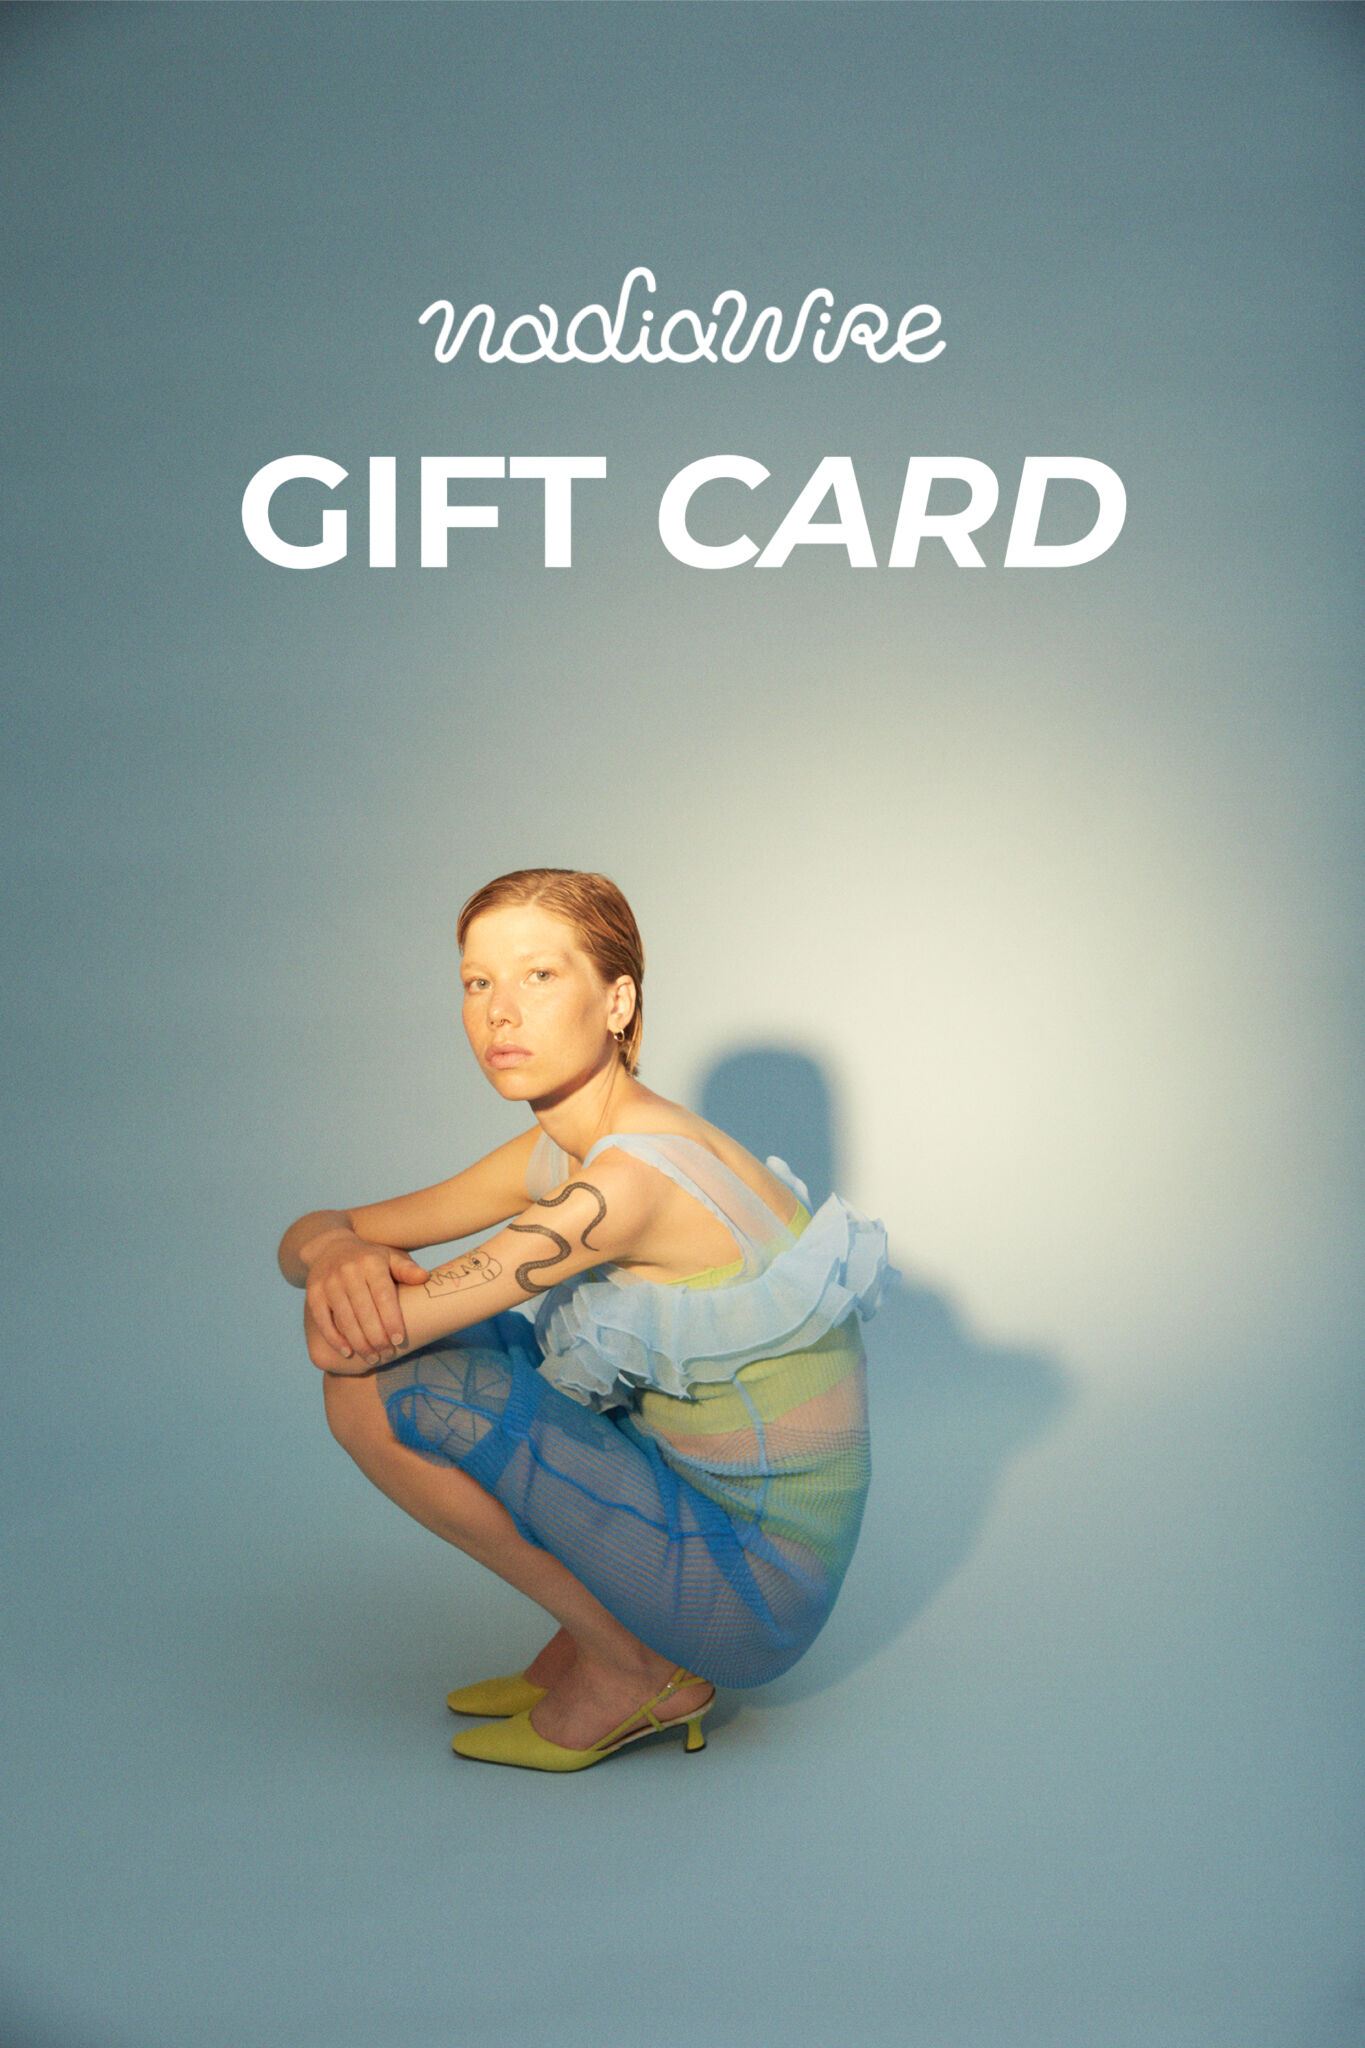 Gift Card at NadiaWire.com for that special someone